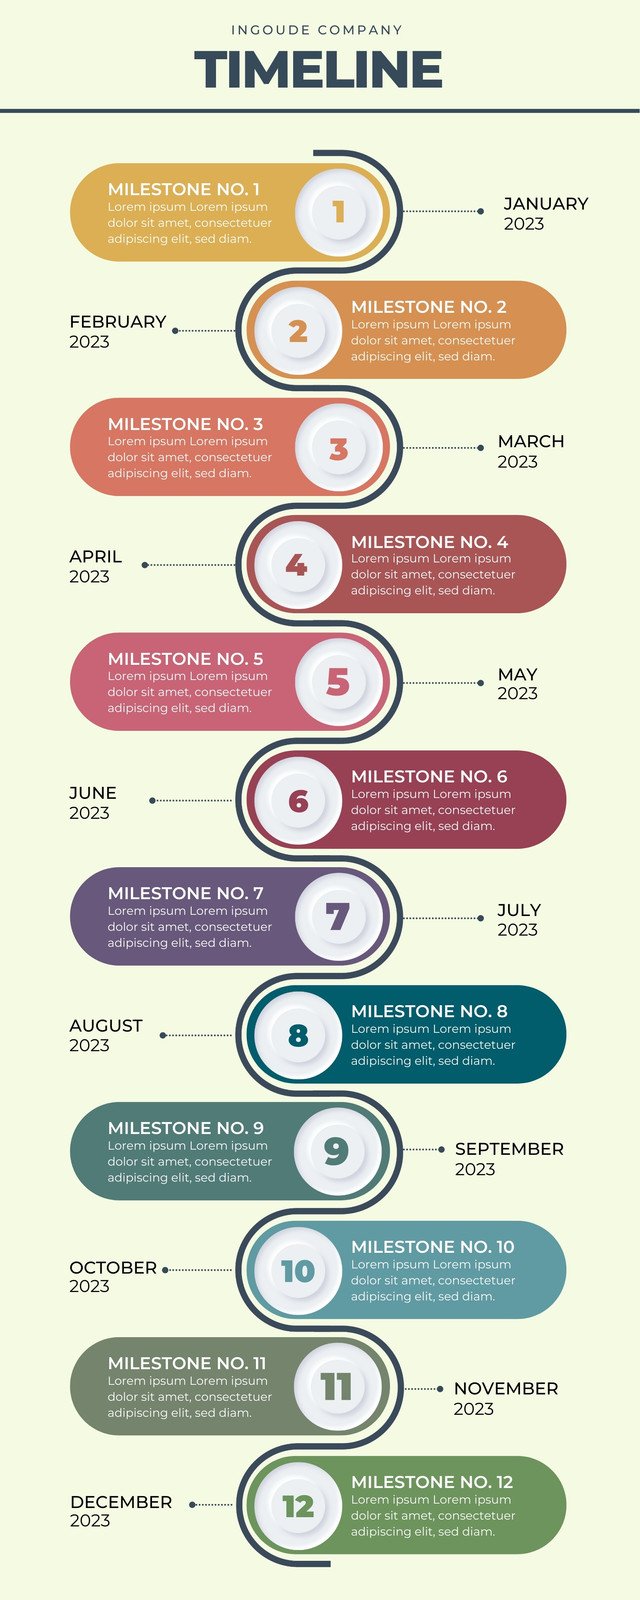 infographic template timeline